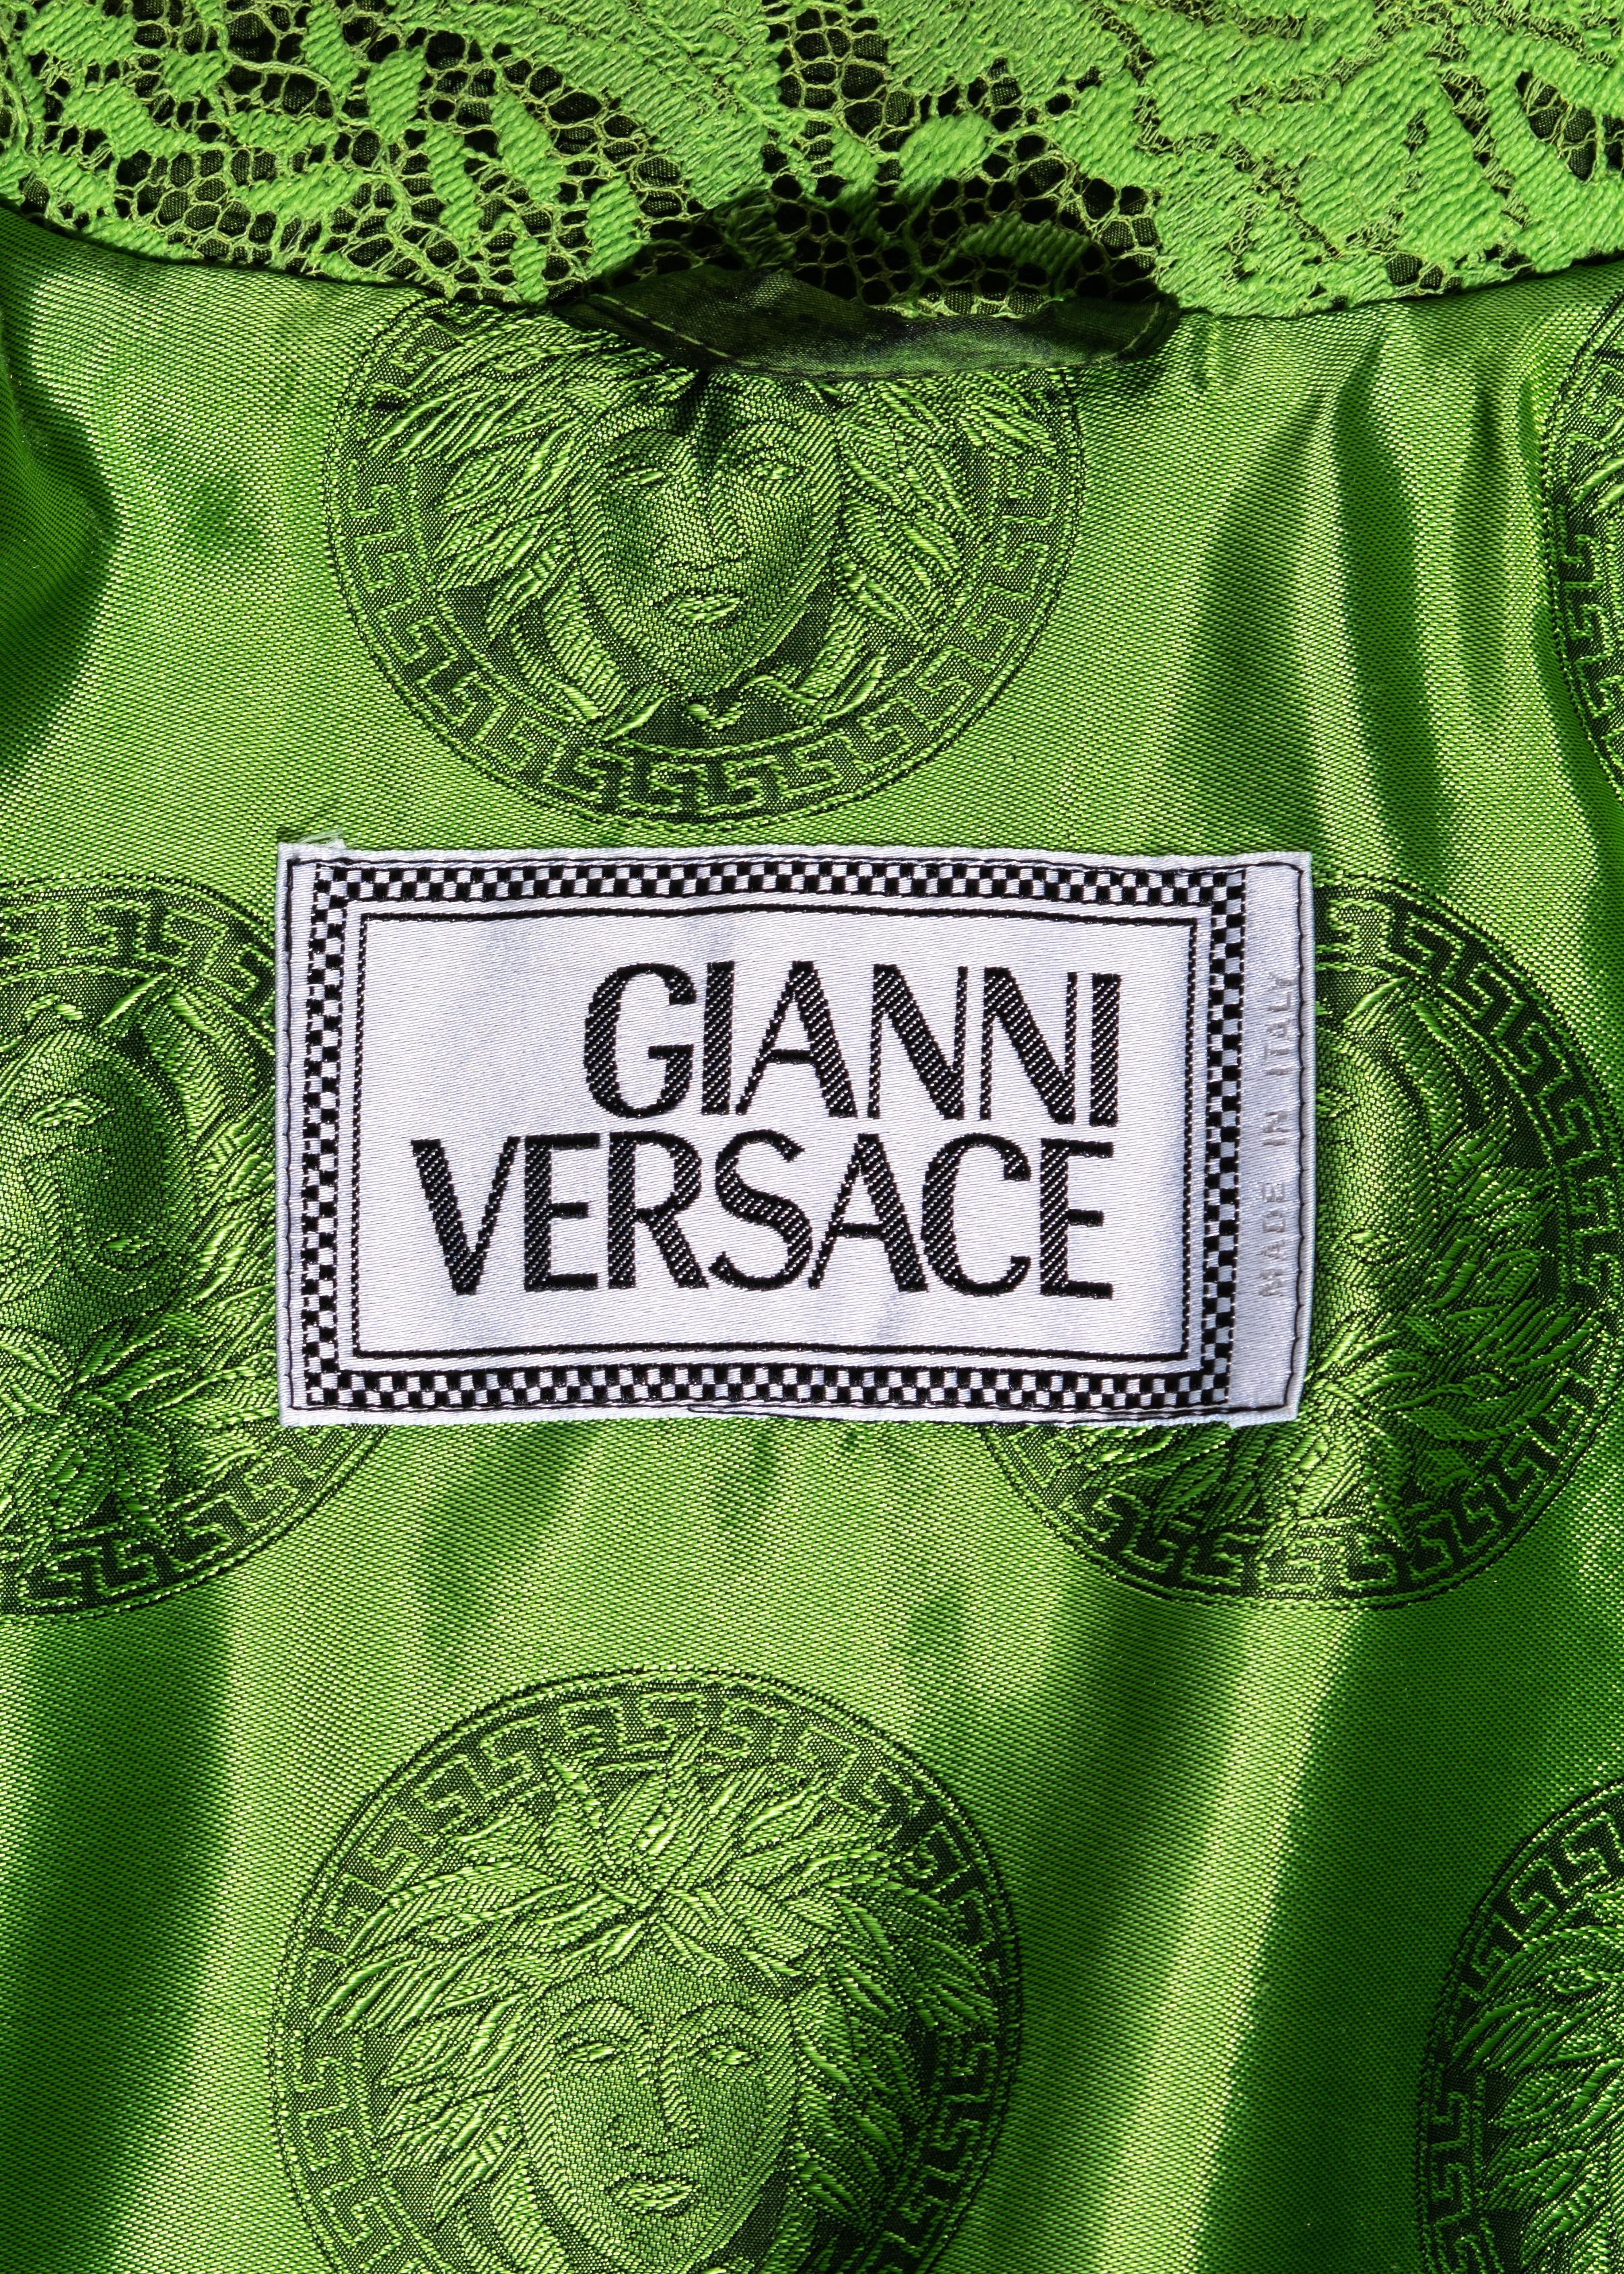 Women's Gianni Versace lime green lace goose down puffer jacket and skirt set, fw 1996 For Sale